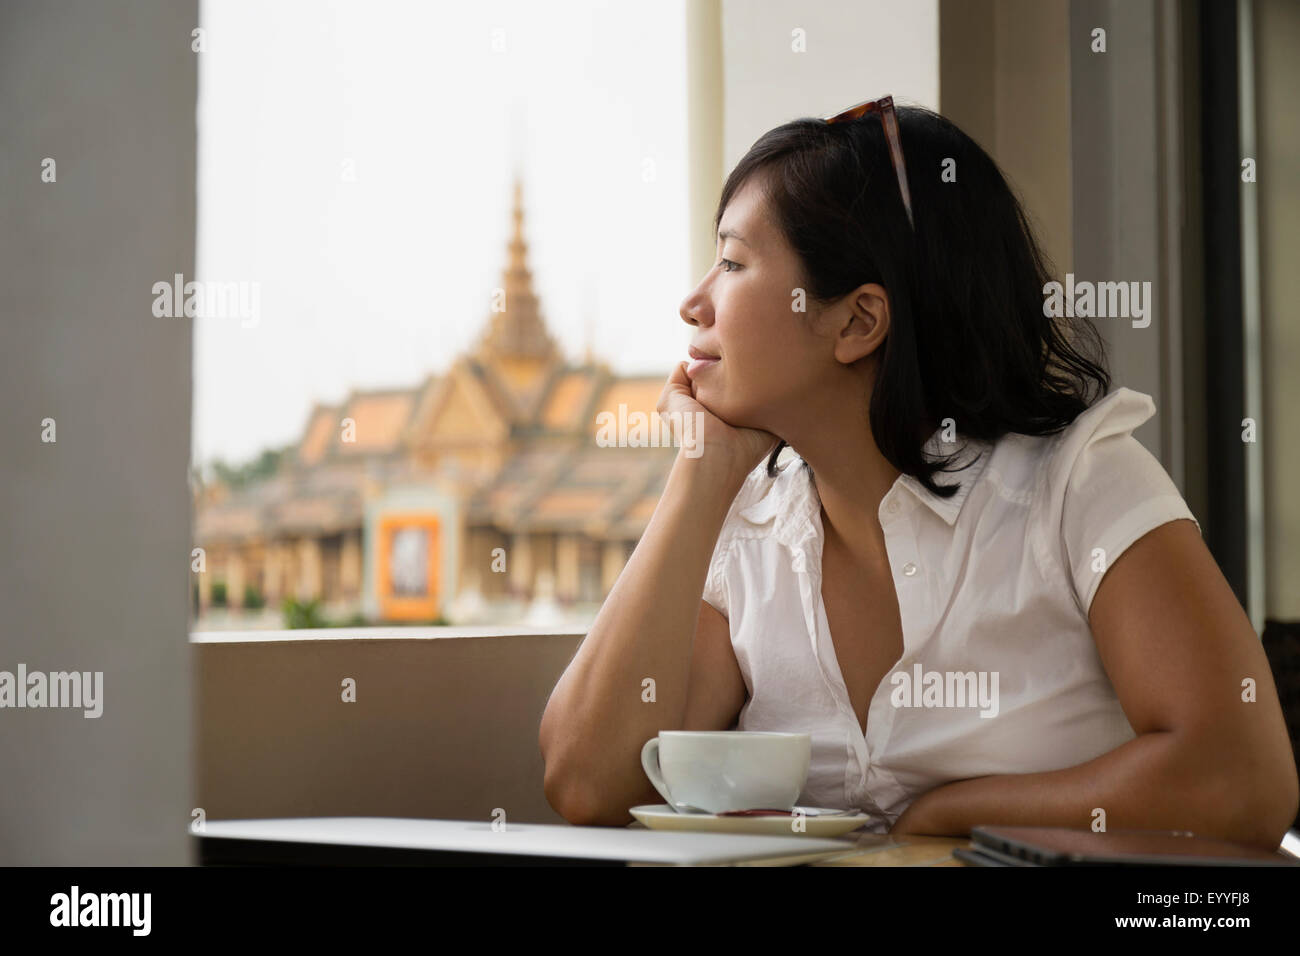 Asian woman looking out window cafe, Phnom Penh, Cambodge Banque D'Images